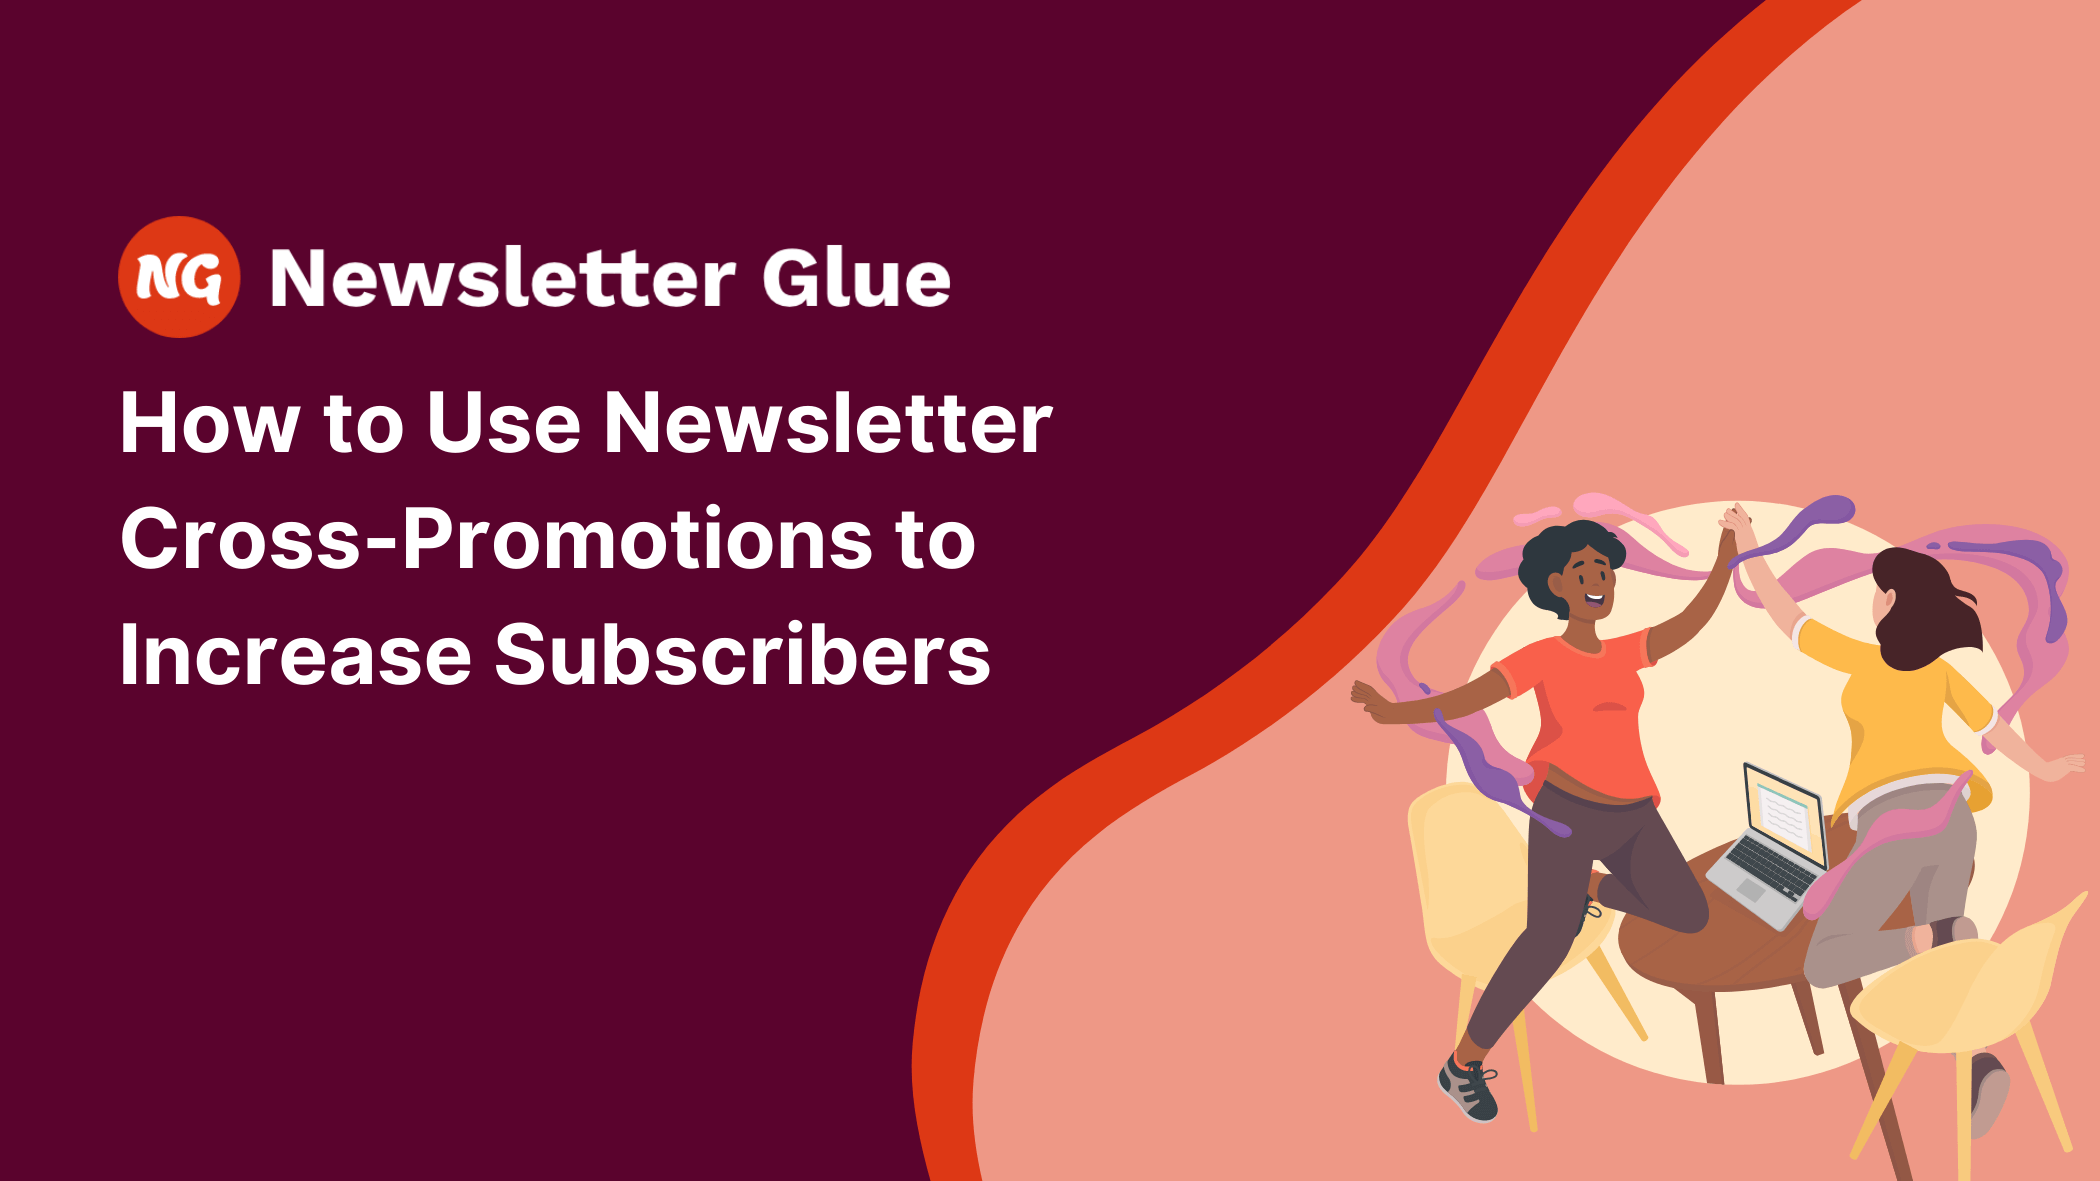 There is a Newsletter Glue logo top right with the following text underneath: How to user Newsletter Cross-Promotions to Increase Subscribers.In the bottom left, there is an illustration of two women face each other across a table with their arms lifted above their heads in an excited manner.